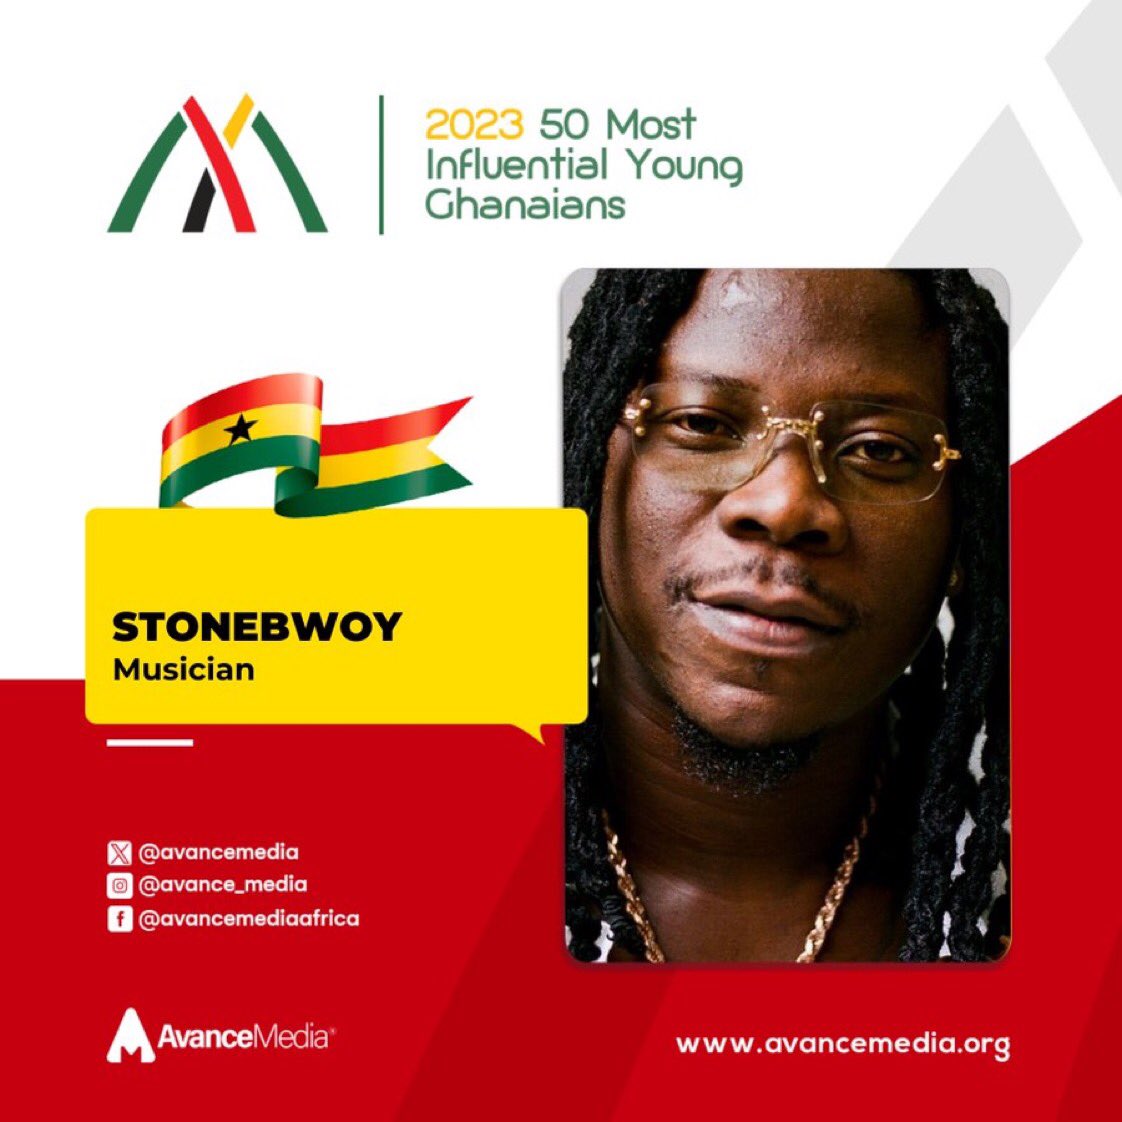 🗞: Stonebwoy was named on the list of 2023 “50 Most Influential Young Ghanaians” powered by @avancemedia.